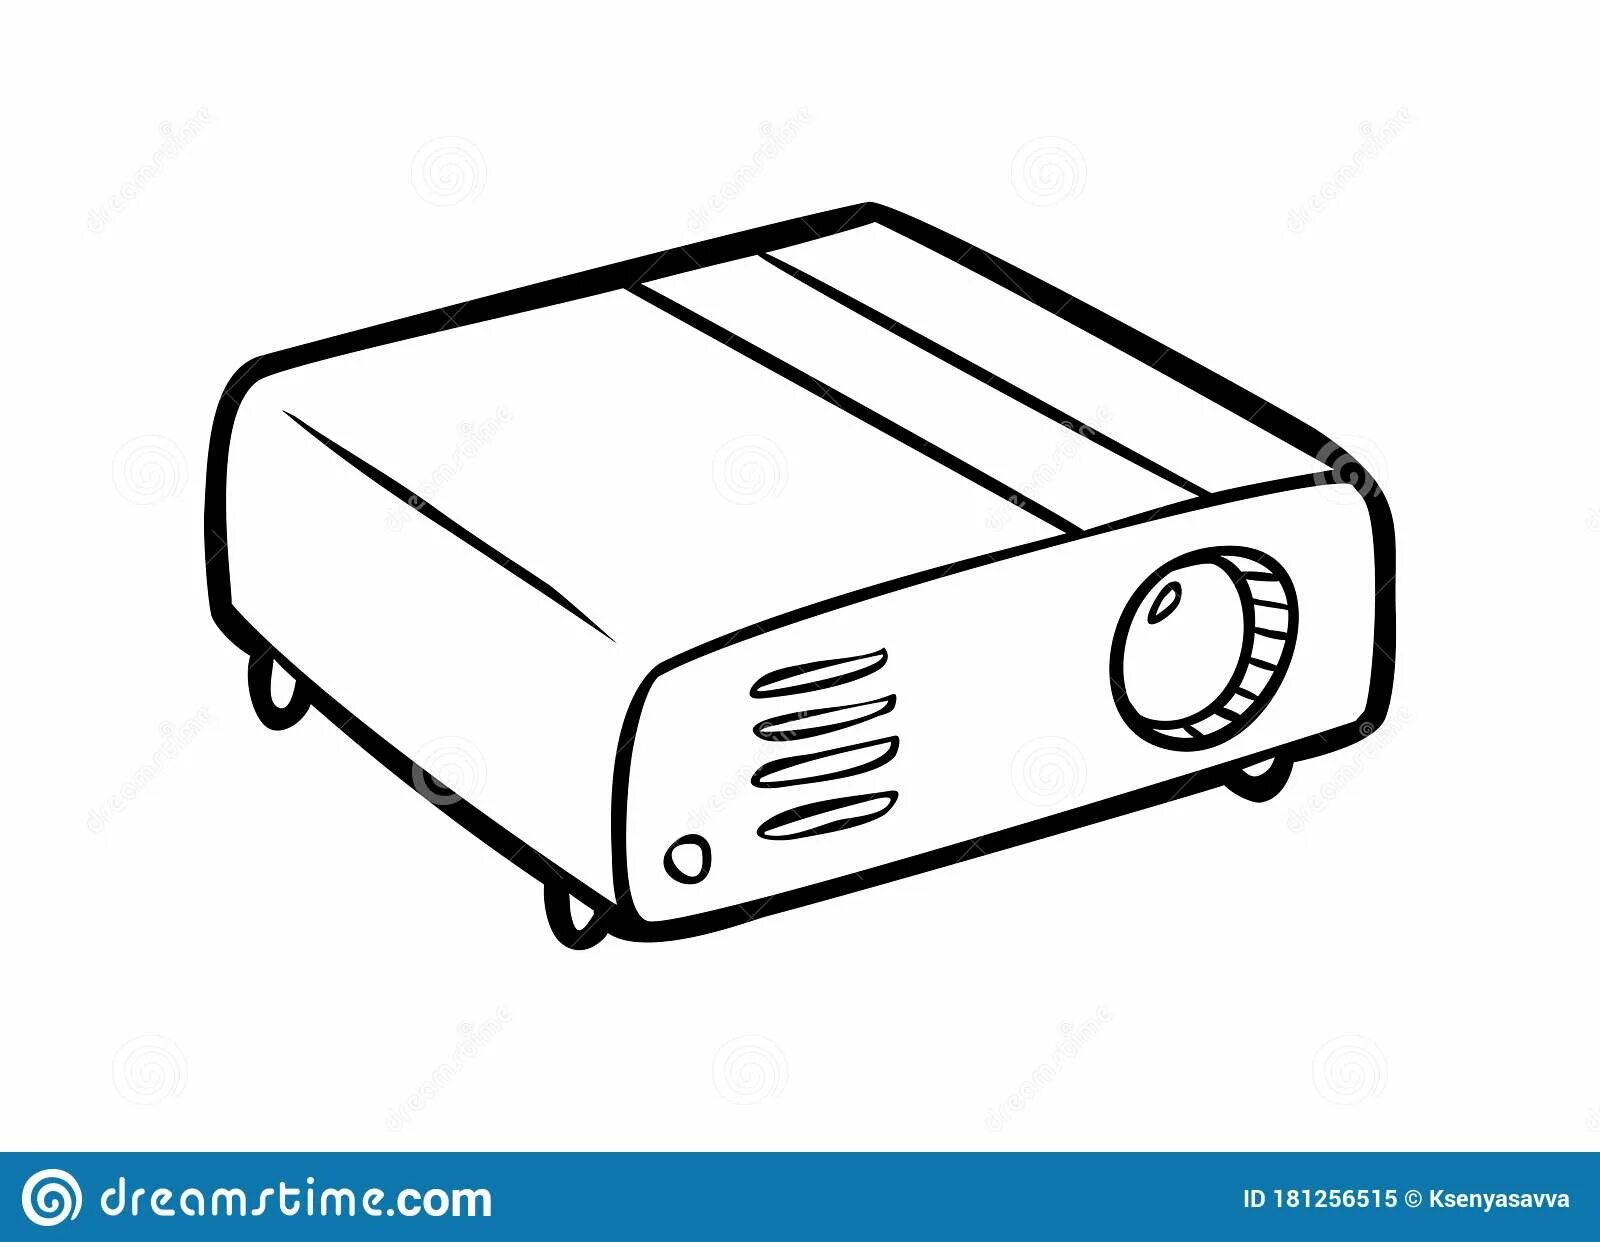 Child projector #13